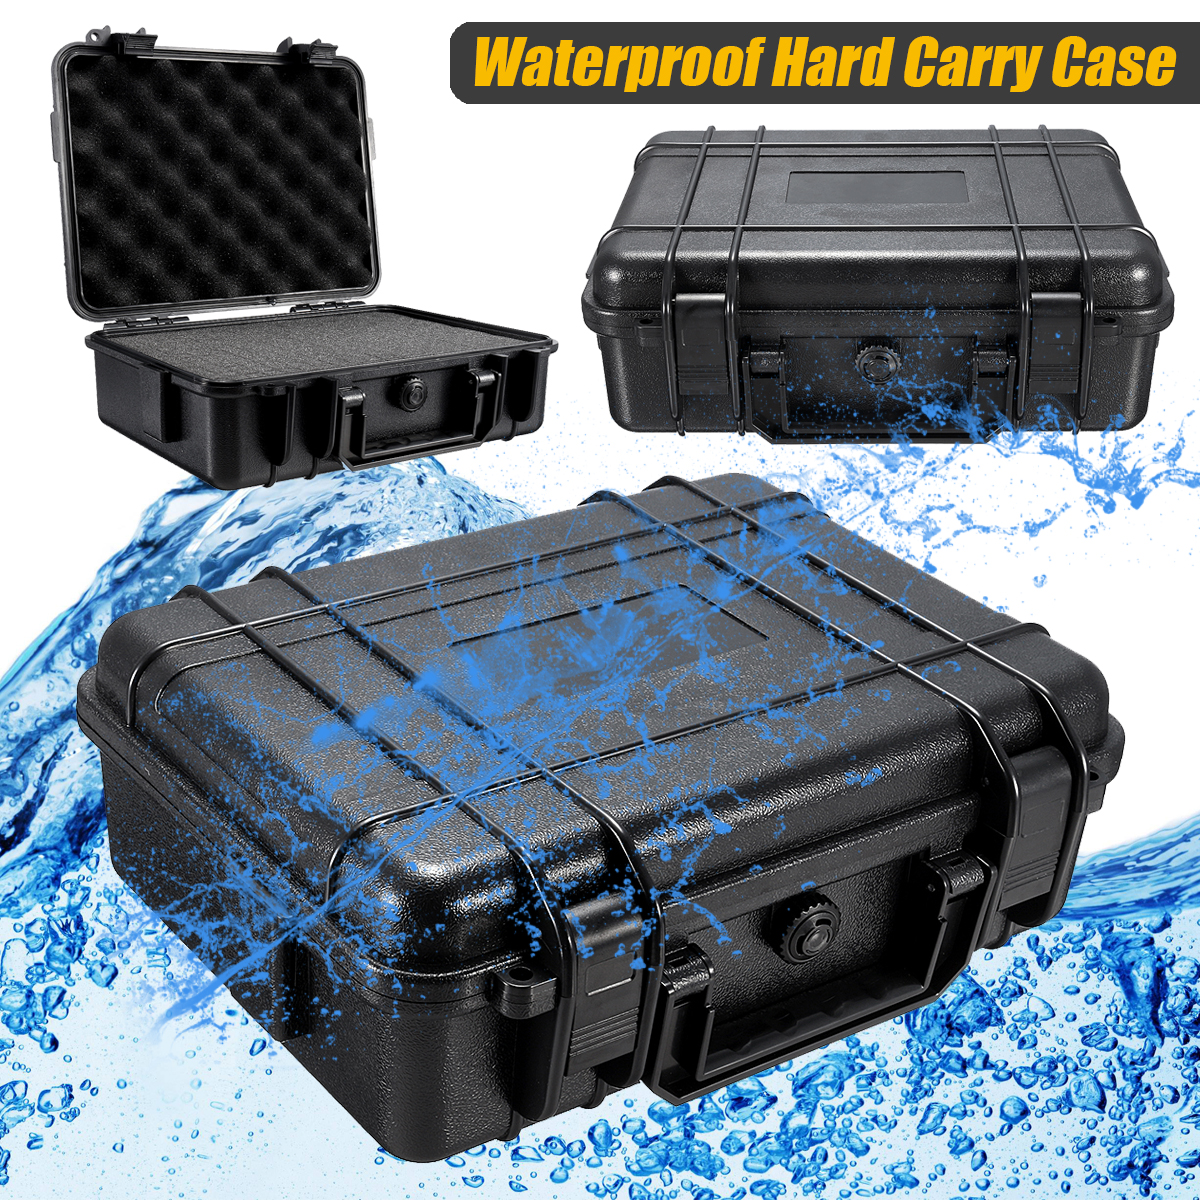 Waterproof-Hard-Carry-Tool-Case-Bag-Storage-Box-Camera-Photography-with-Sponge-1636226-2